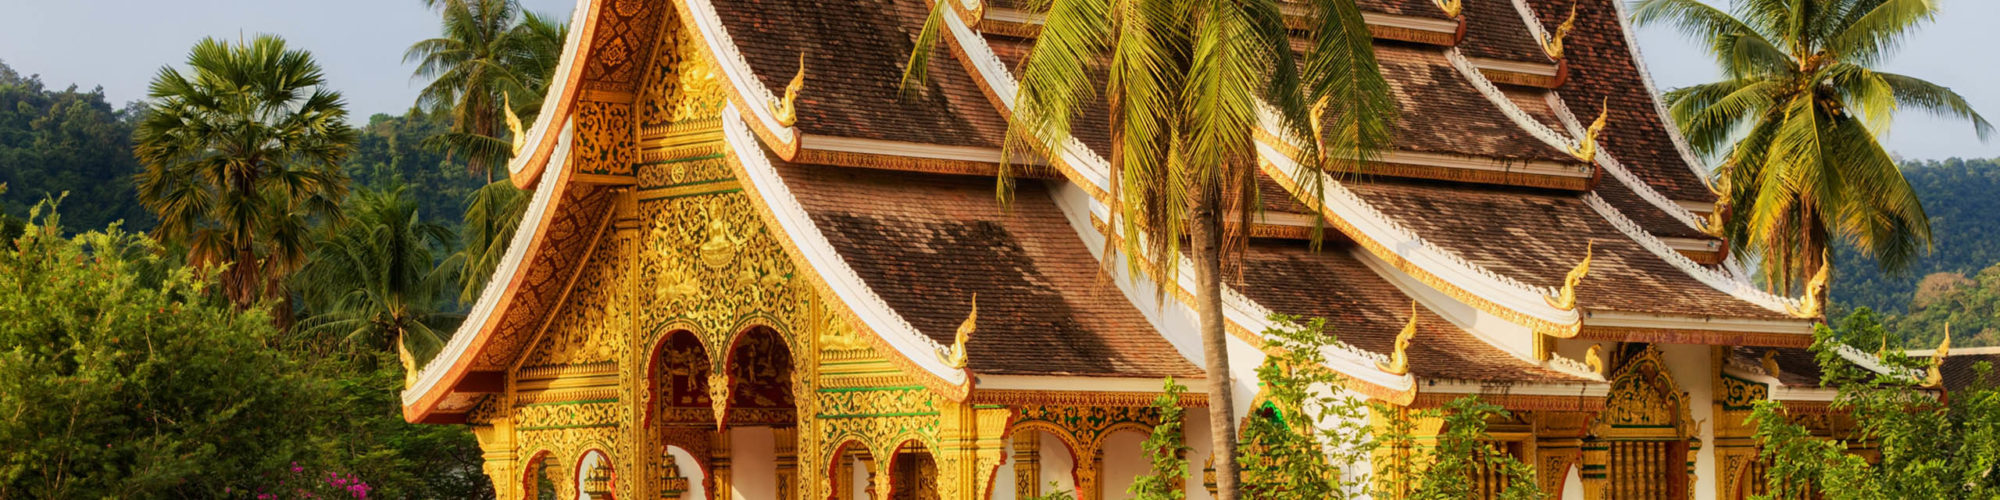 Luang Prabang travel agents packages deals